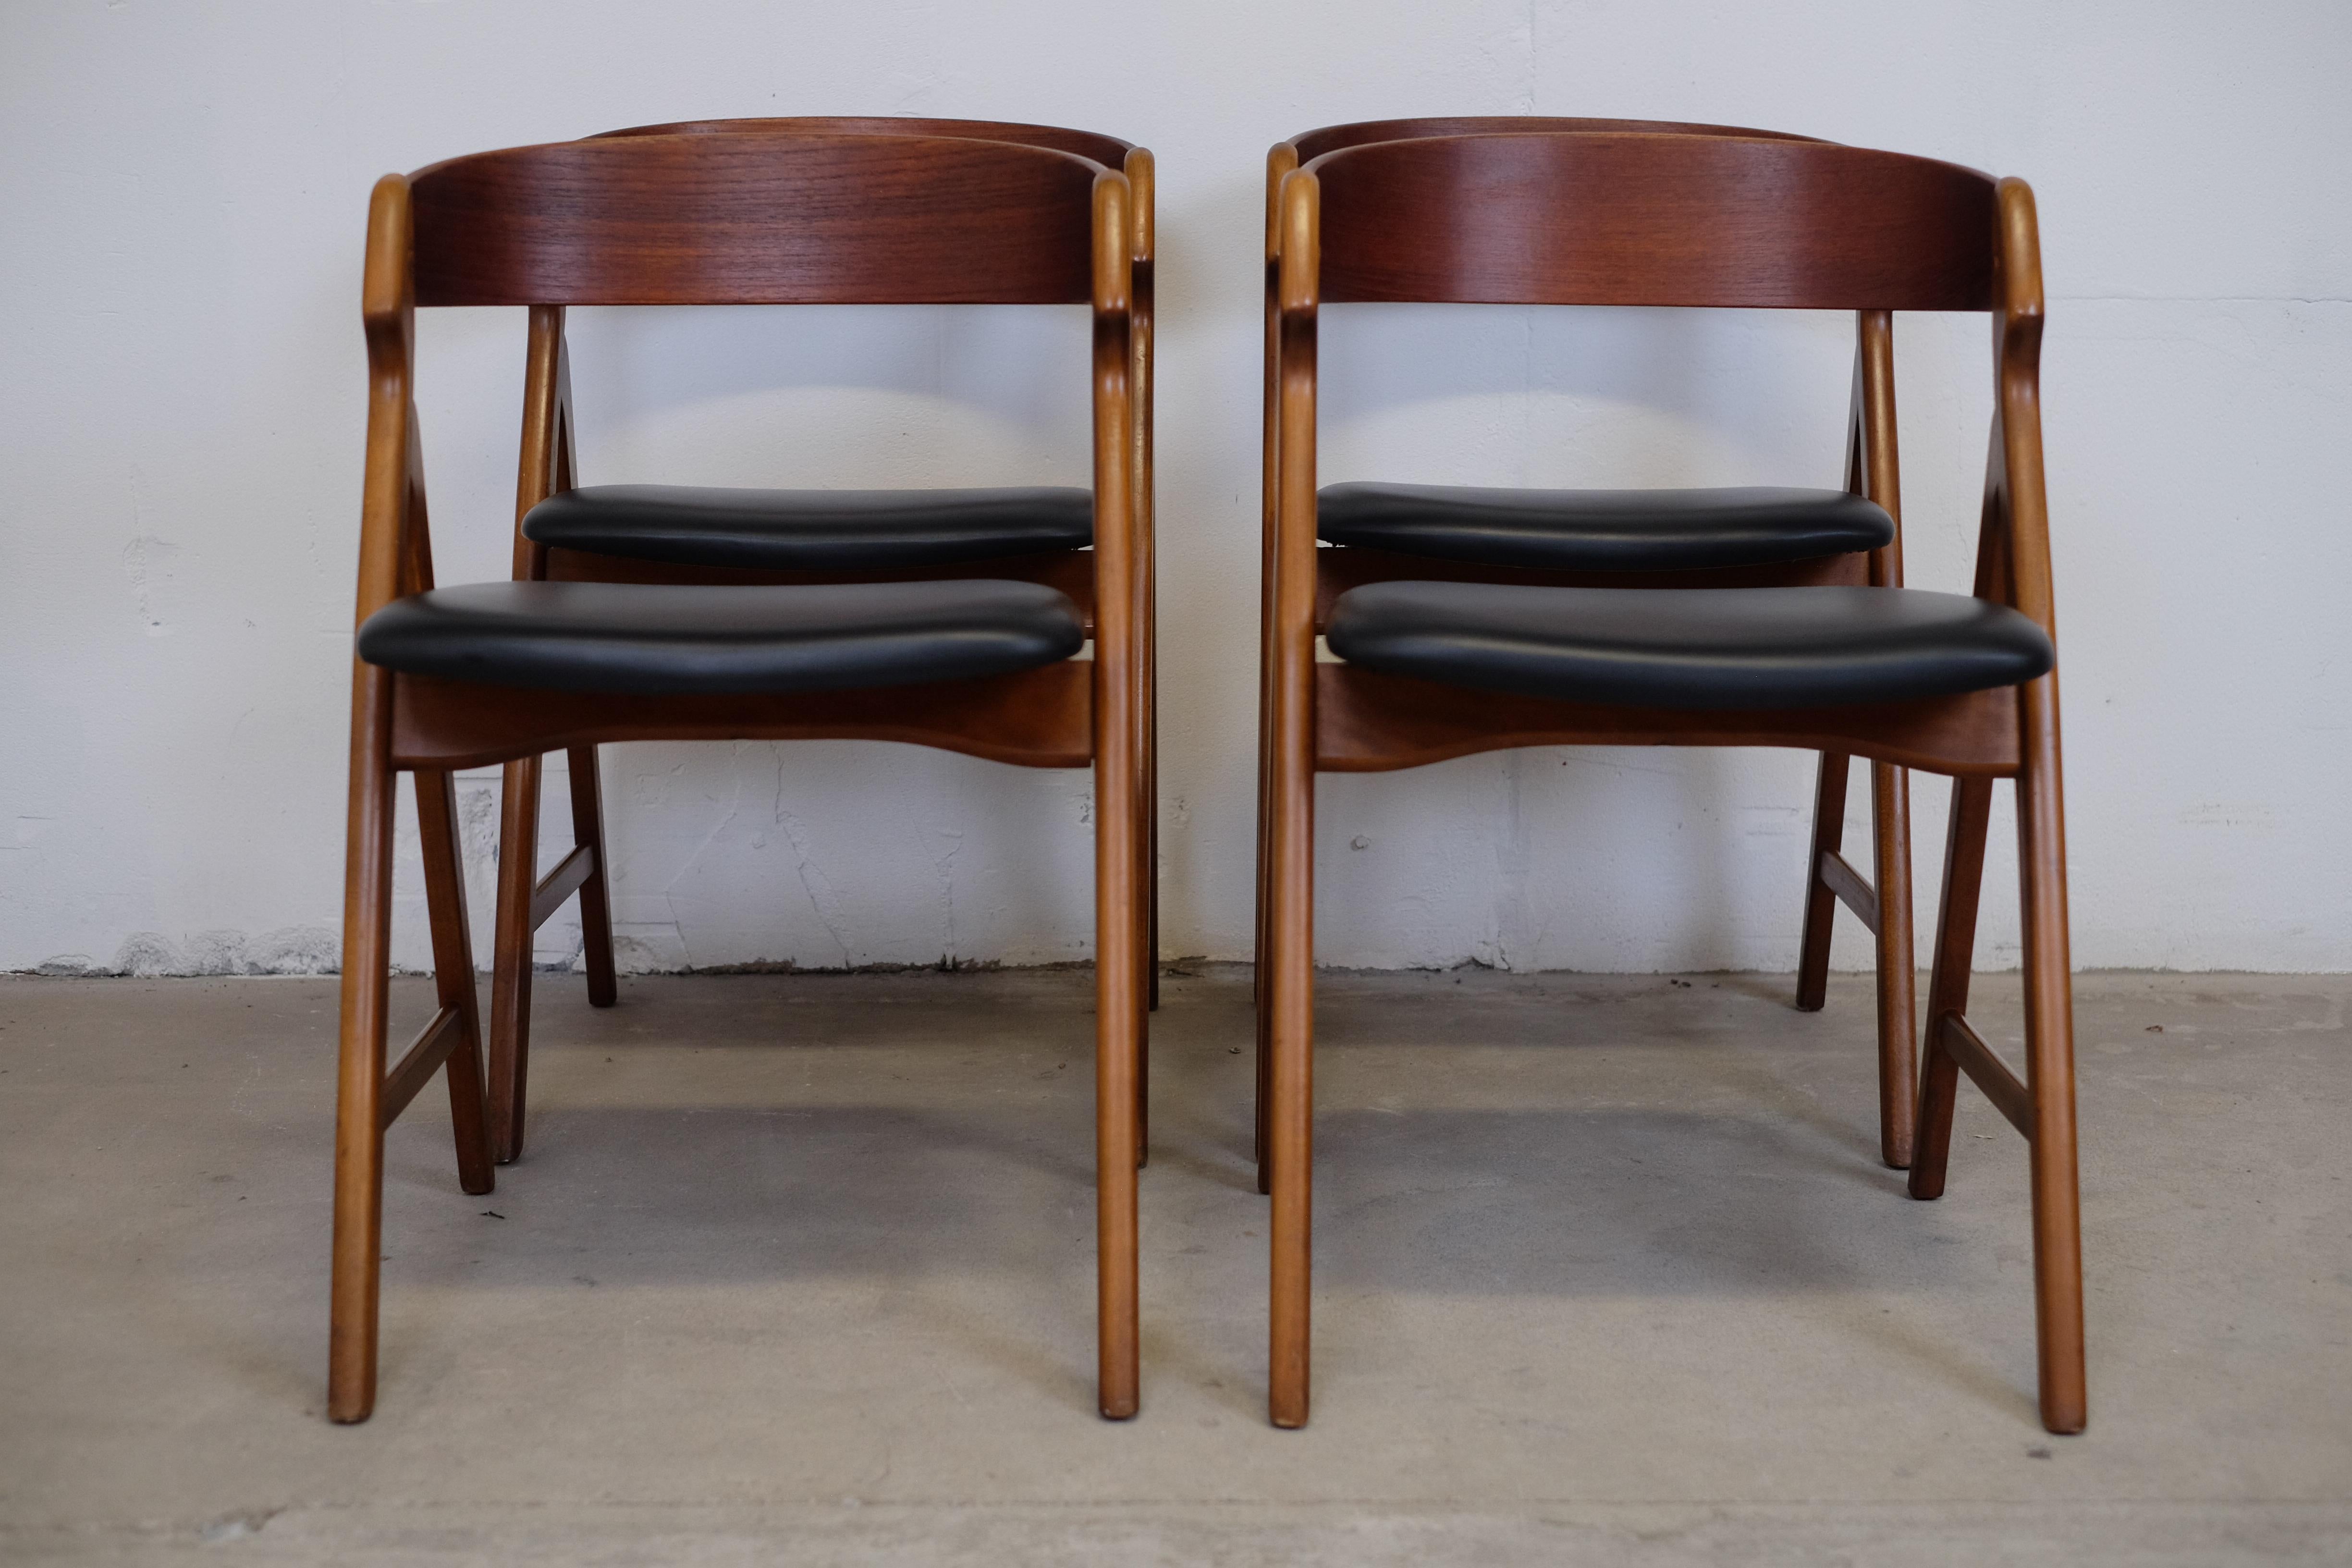 This beautiful set of four Danish dining chairs, designed by Henning Kjaernulf in the 1960s is one of his great classics, which now has been placed in the same home since they were bought in 64. They want to go on new adventure and live on and even